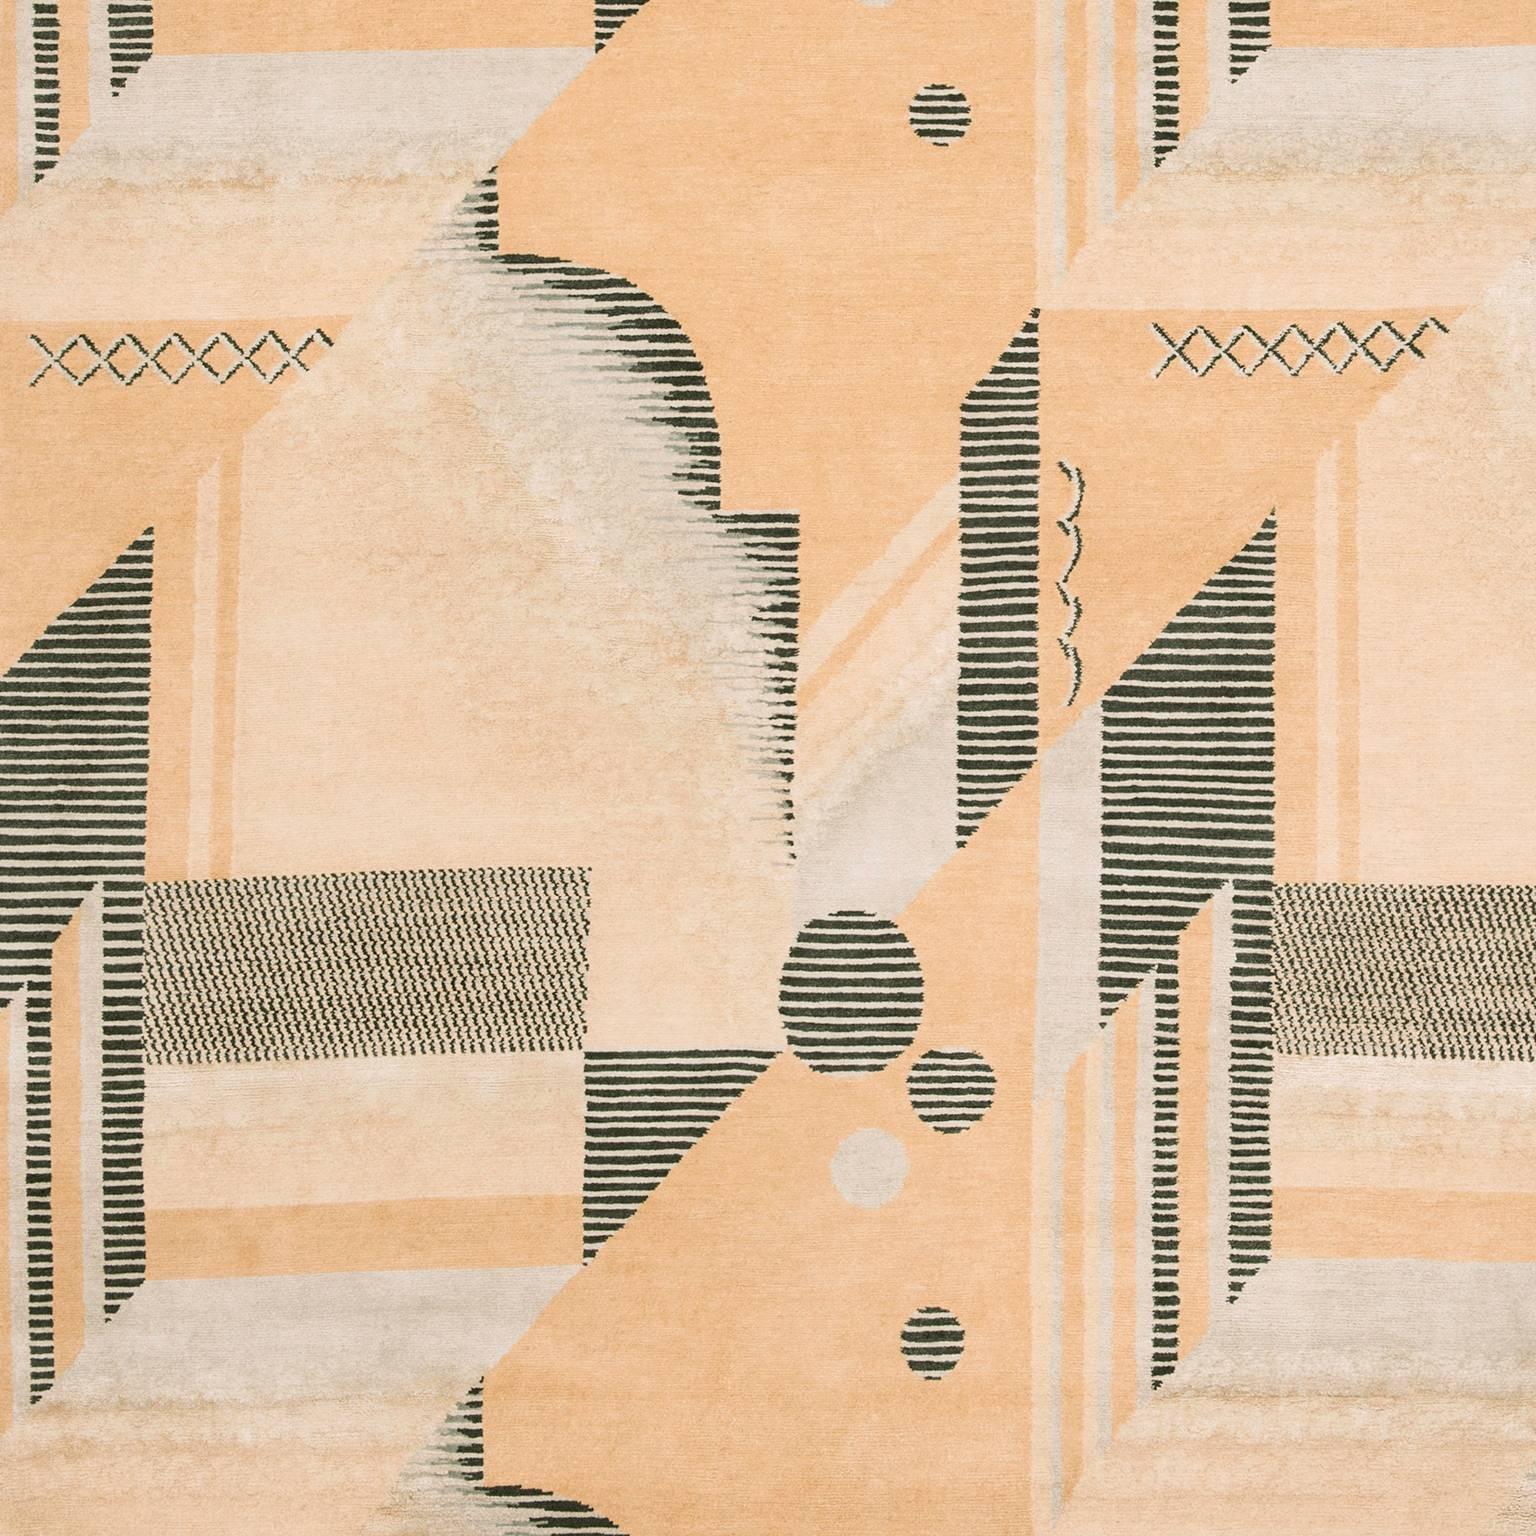 The inspiration behind this modernistic Art Deco rug came from an original piece of Art Deco fabric. This 1920s geometric design has been updated using fresh modern colors, a combination of eras creating a timeless Classic rug. ‘Art Deco’ has been